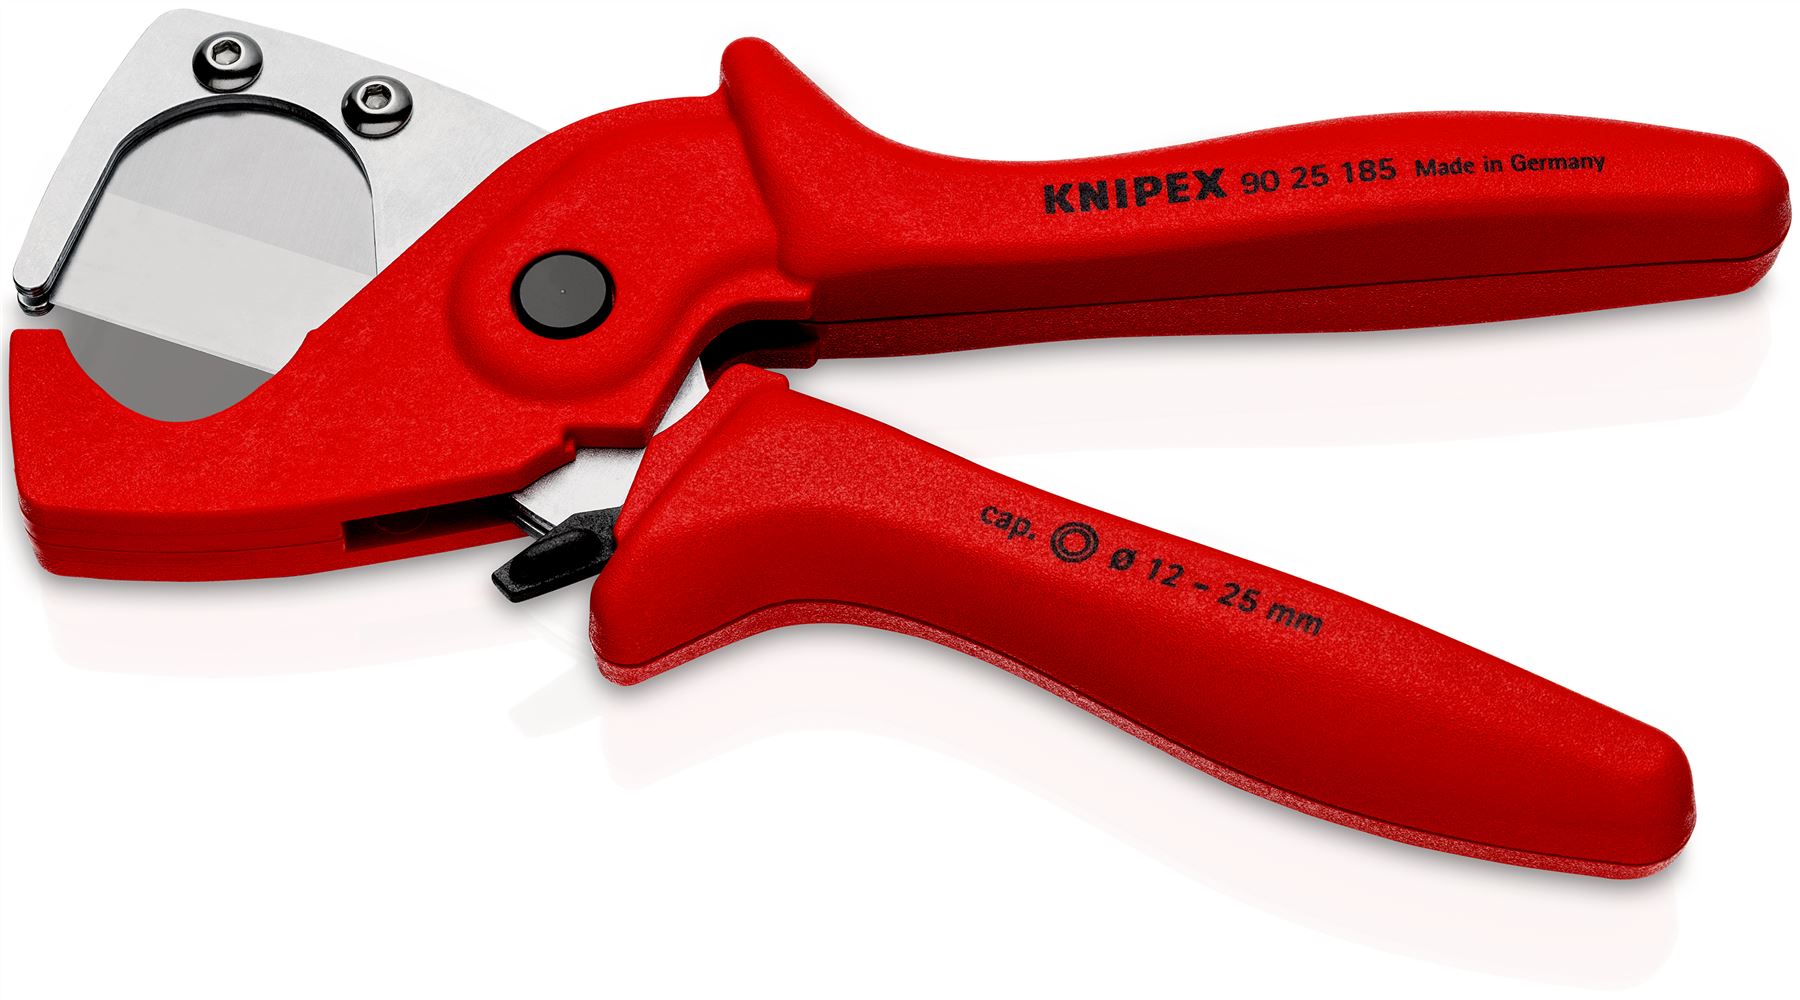 KNIPEX Pipe Cutters for Plastic Composite Pipes 185mm 12-25mm Diameter 90 25 185